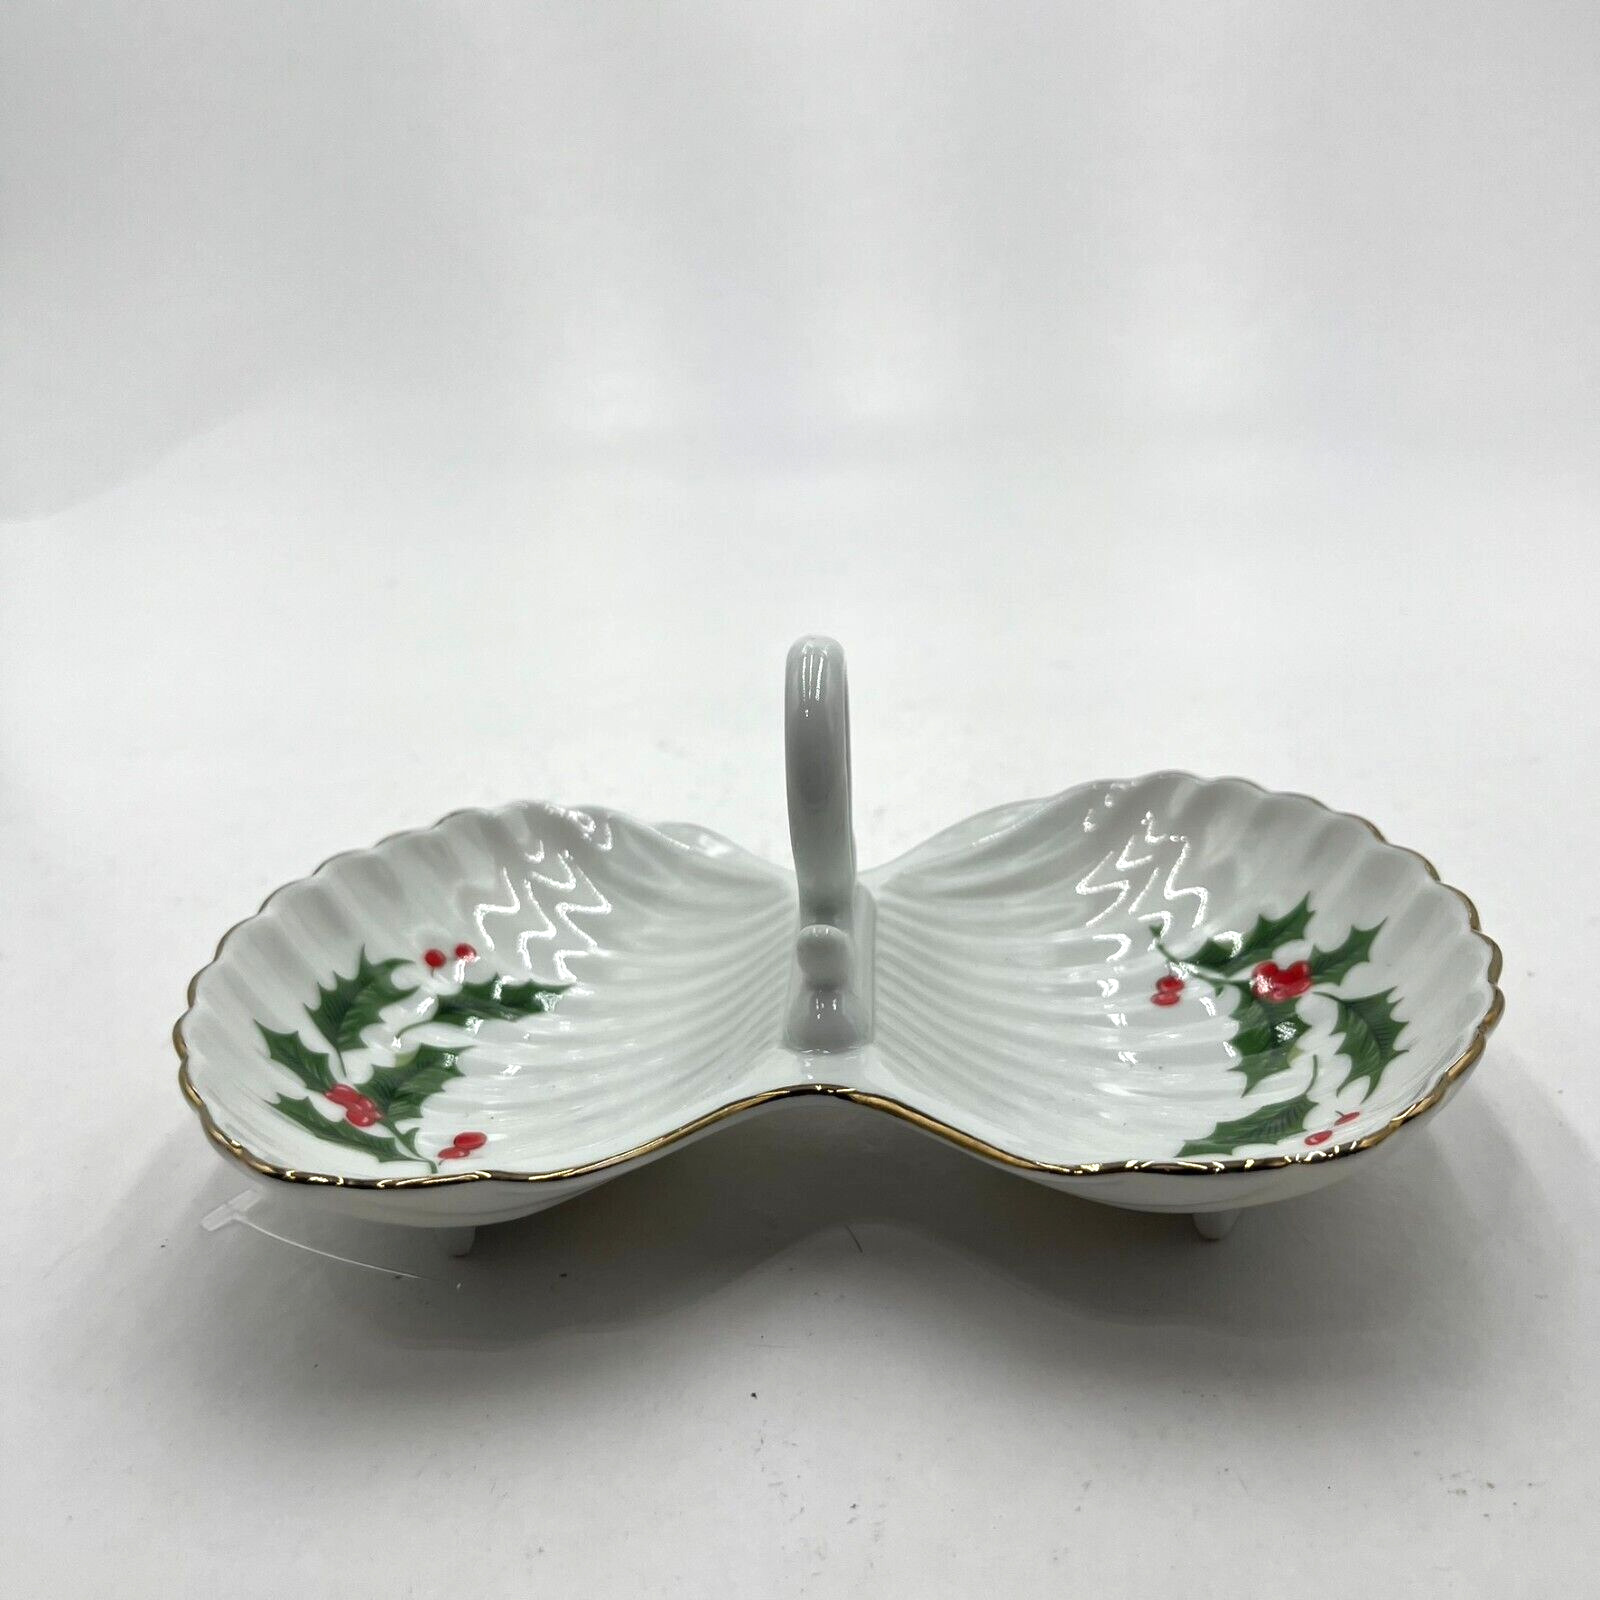 Vintage Christmas Candy Dish Gold Trim with Holly Berry Japan Ceramic